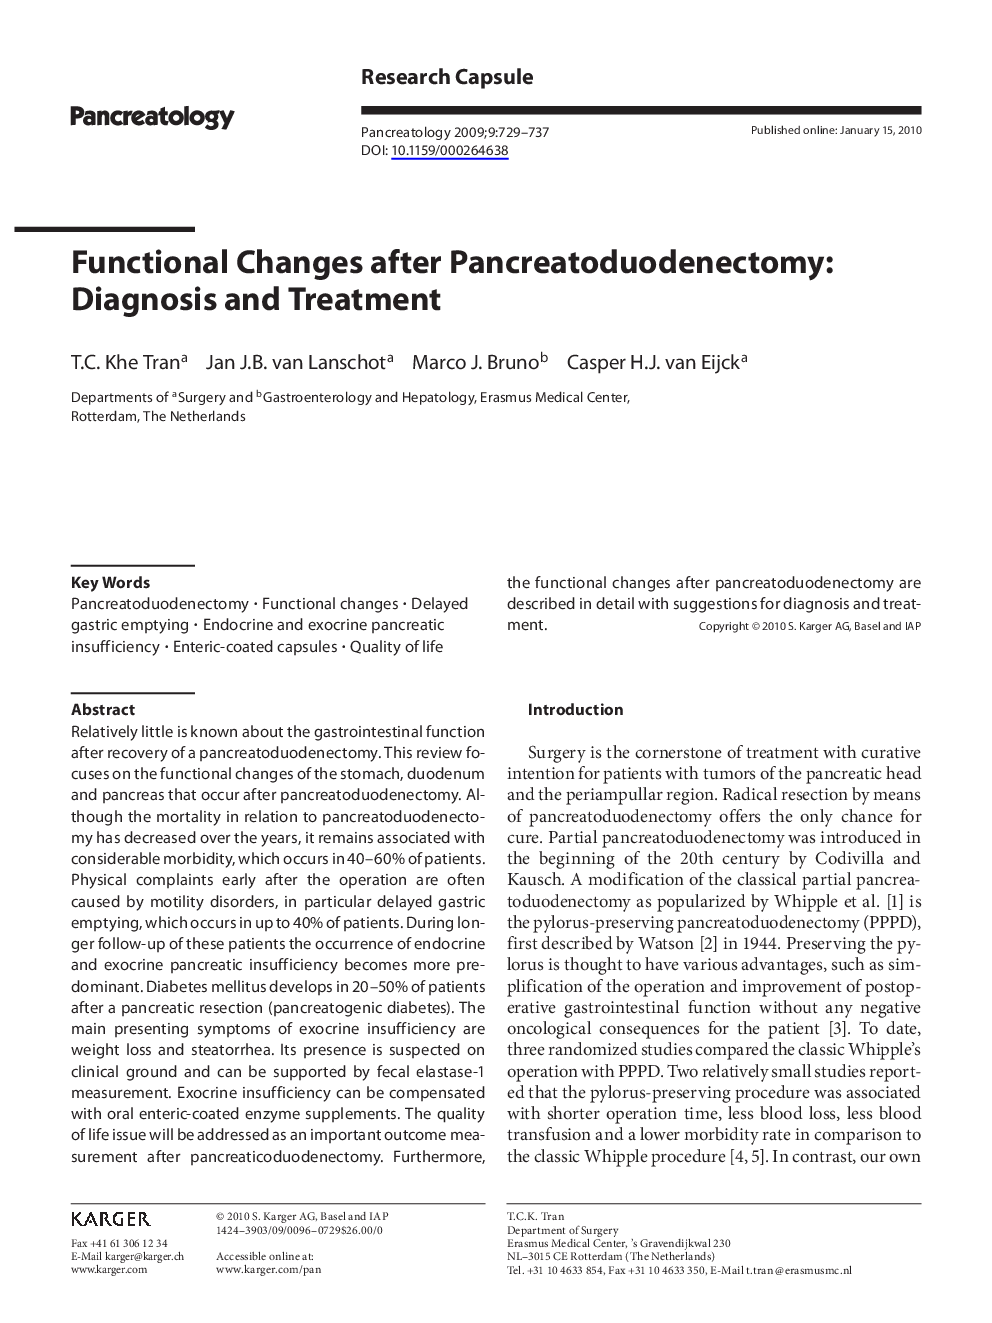 Functional Changes after Pancreatoduodenectomy: Diagnosis and Treatment